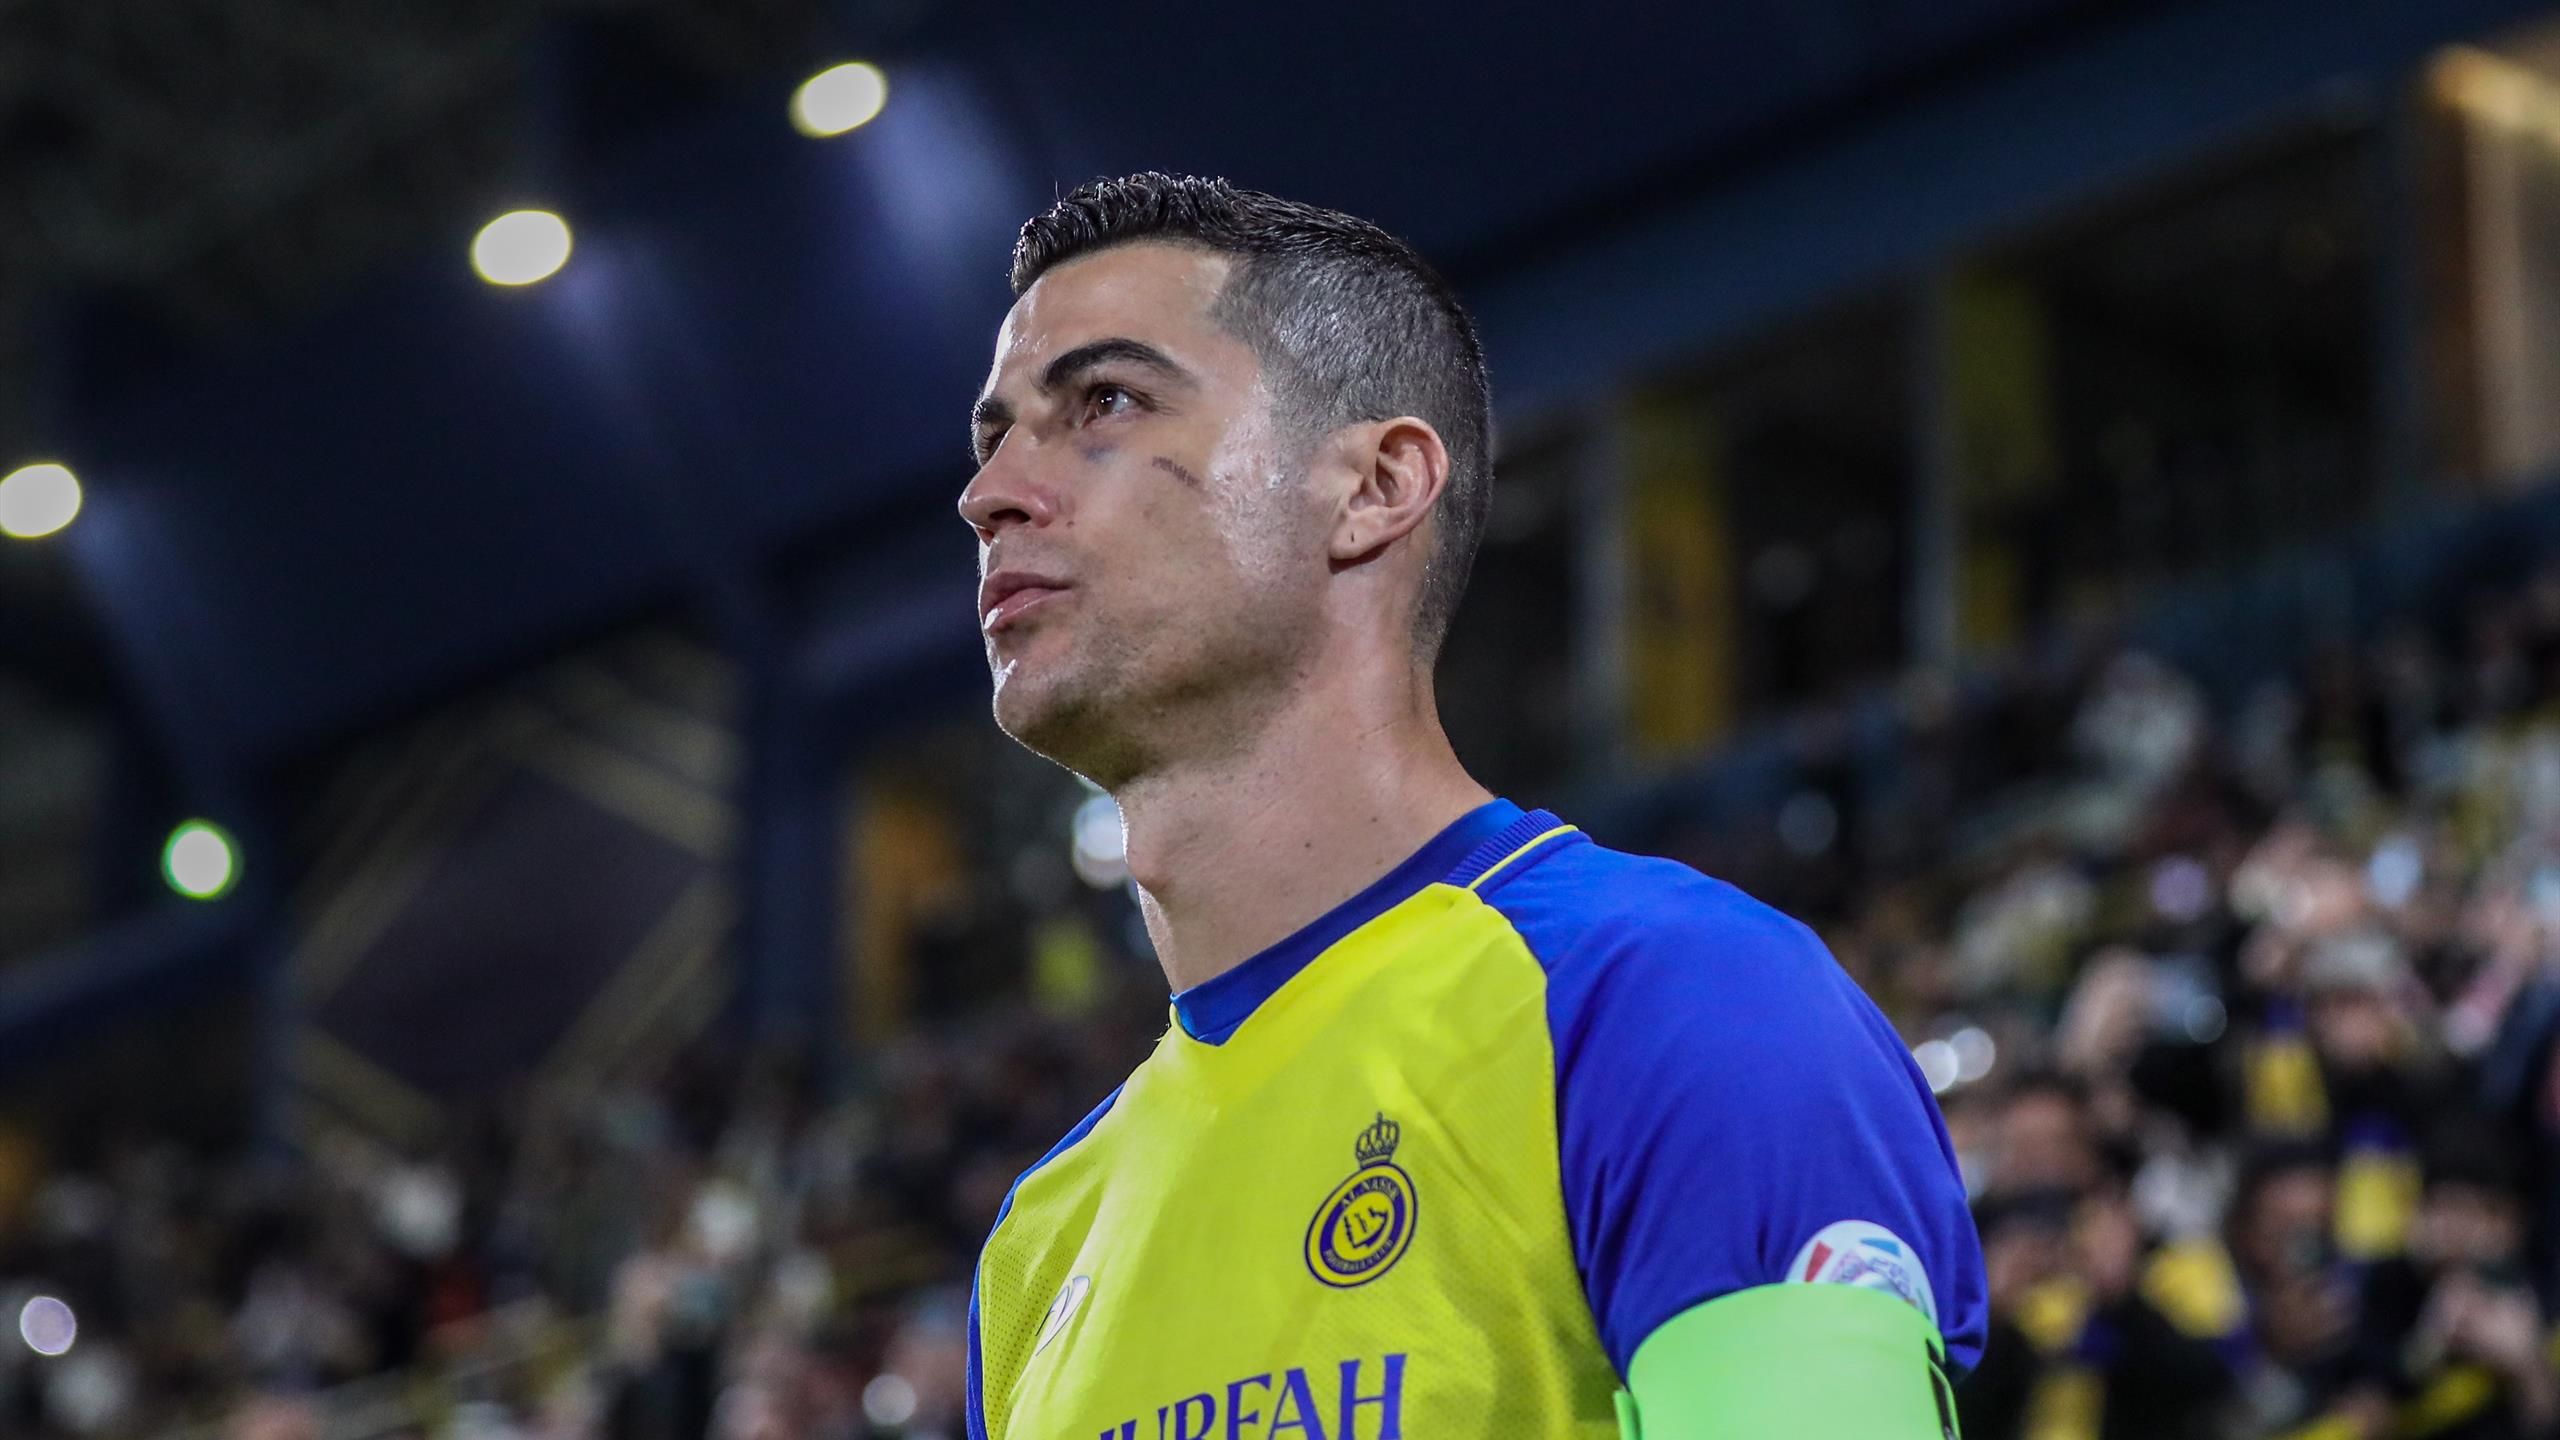 Cristiano Ronaldo wears captains armband as Al Nassr win on strikers delayed debut